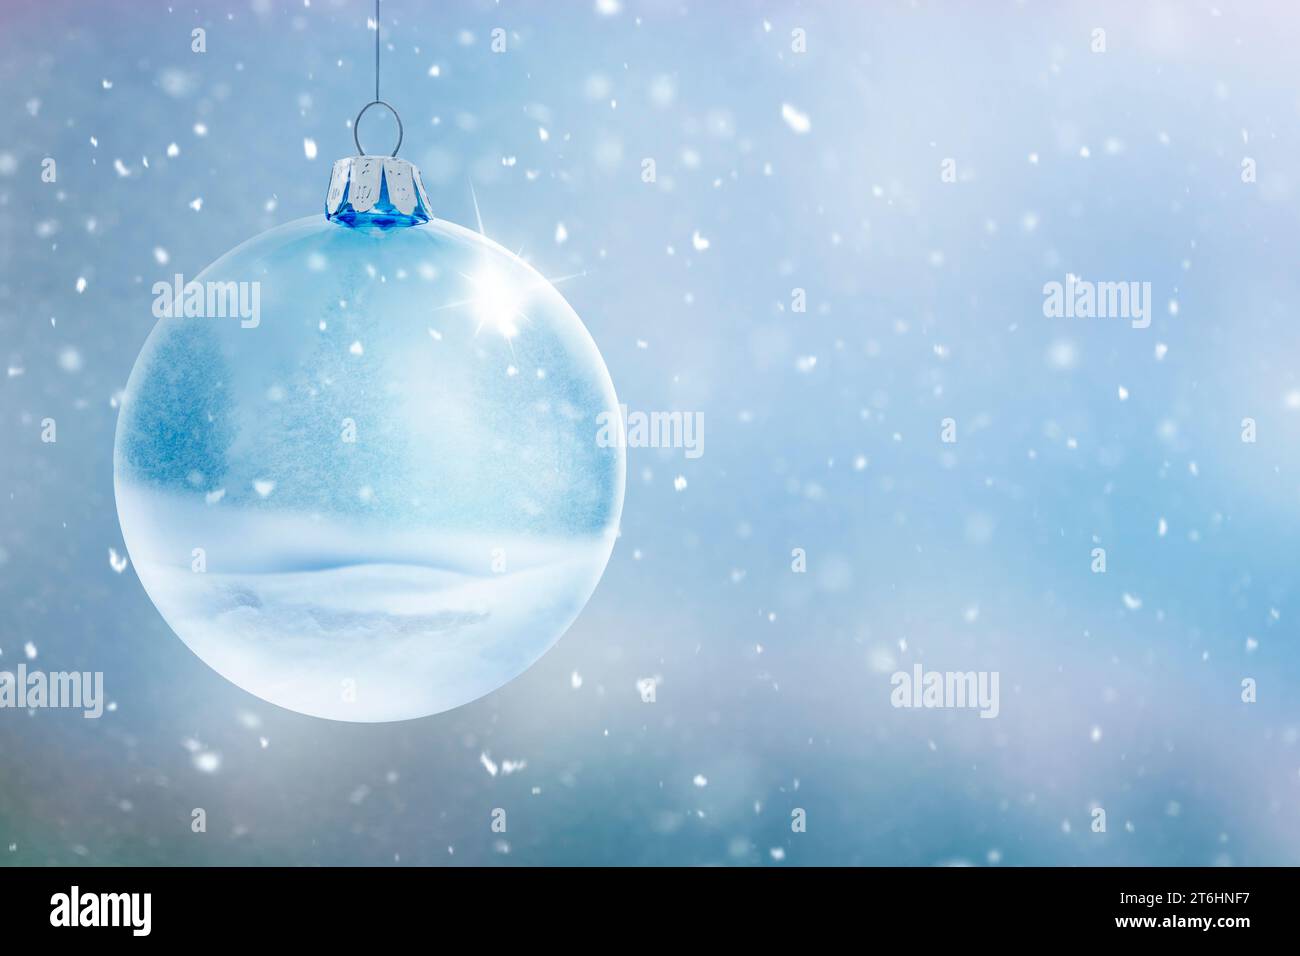 Transparent glass ball against blurred winter background with snowflakes Stock Photo